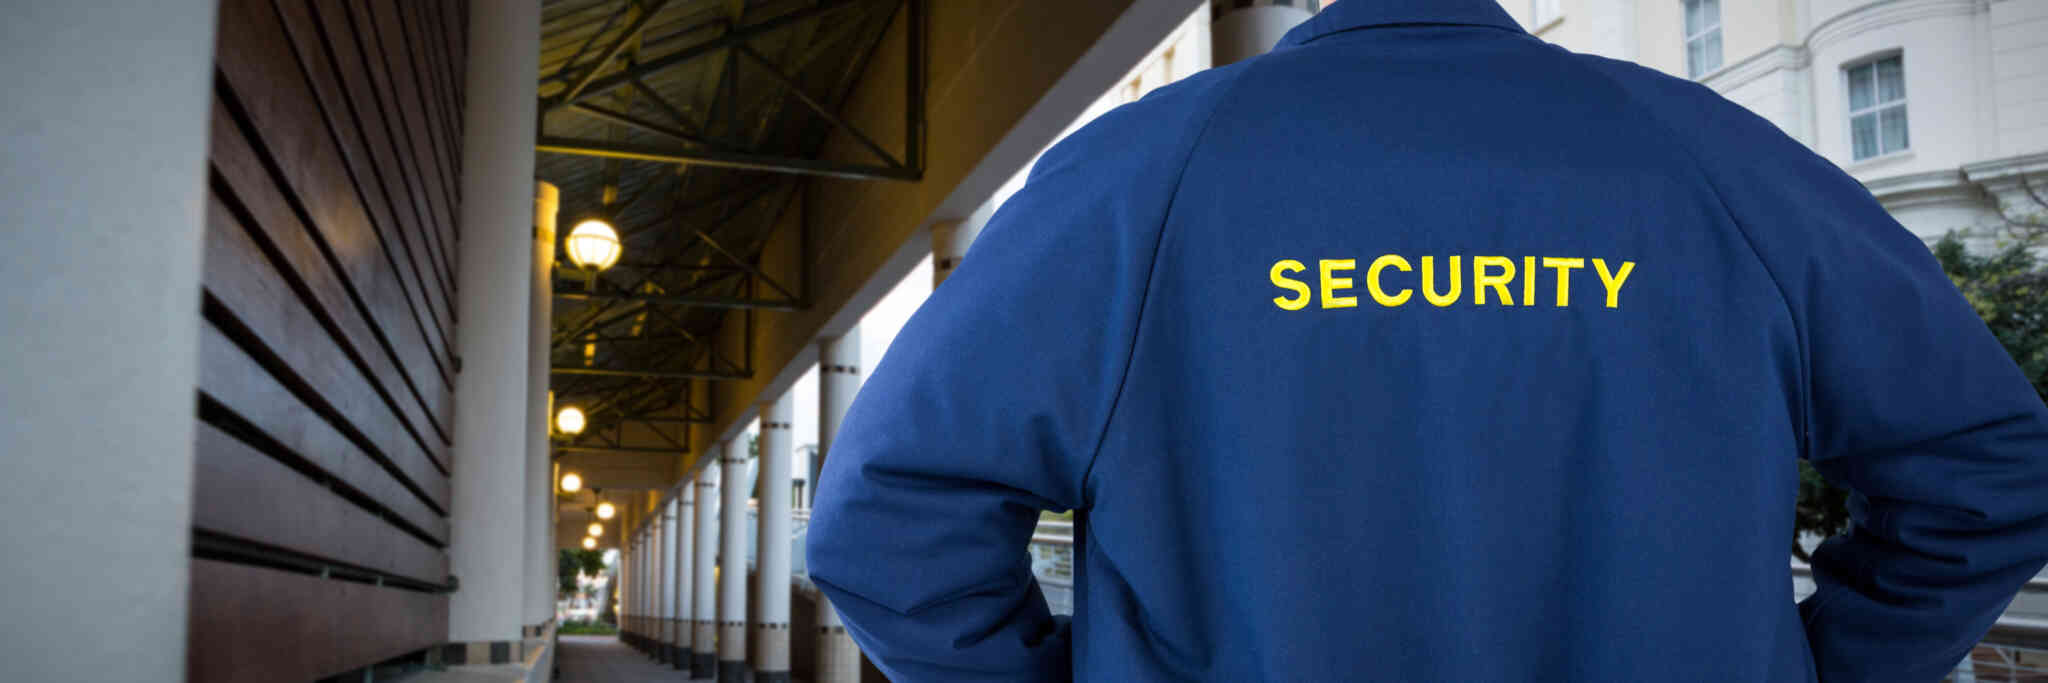 5 Reasons a Security Officer's Uniform is so Important - Security Guards &  Services